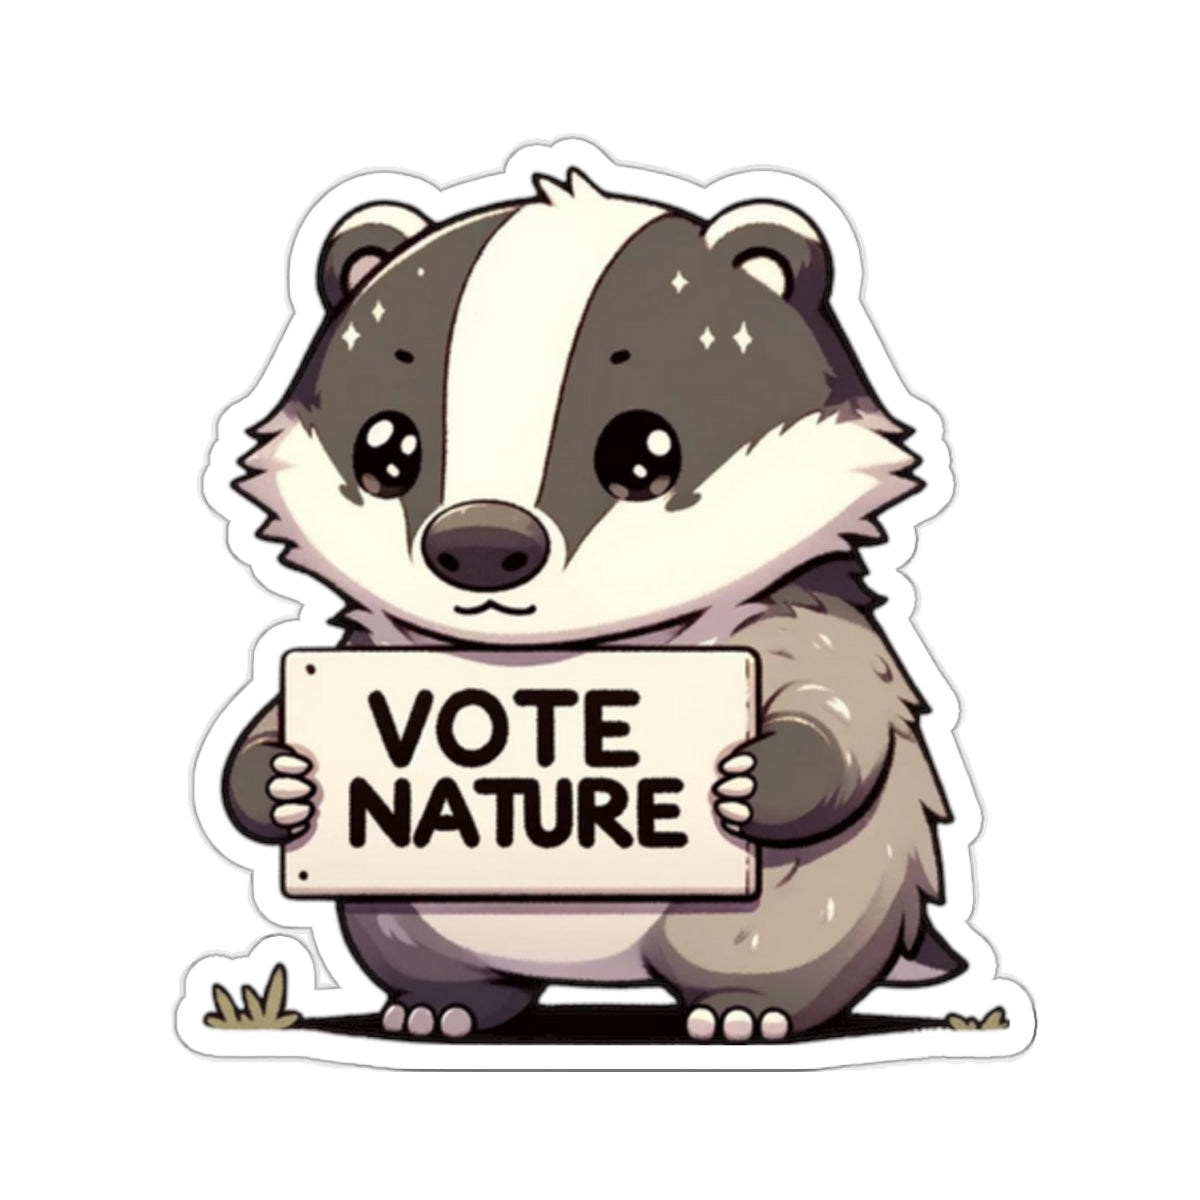 Inspirational Cute Badger Statement vinyl Sticker: Vote Nature! for laptop, kindle, phone, ipad, instrument case, notebook, mood board